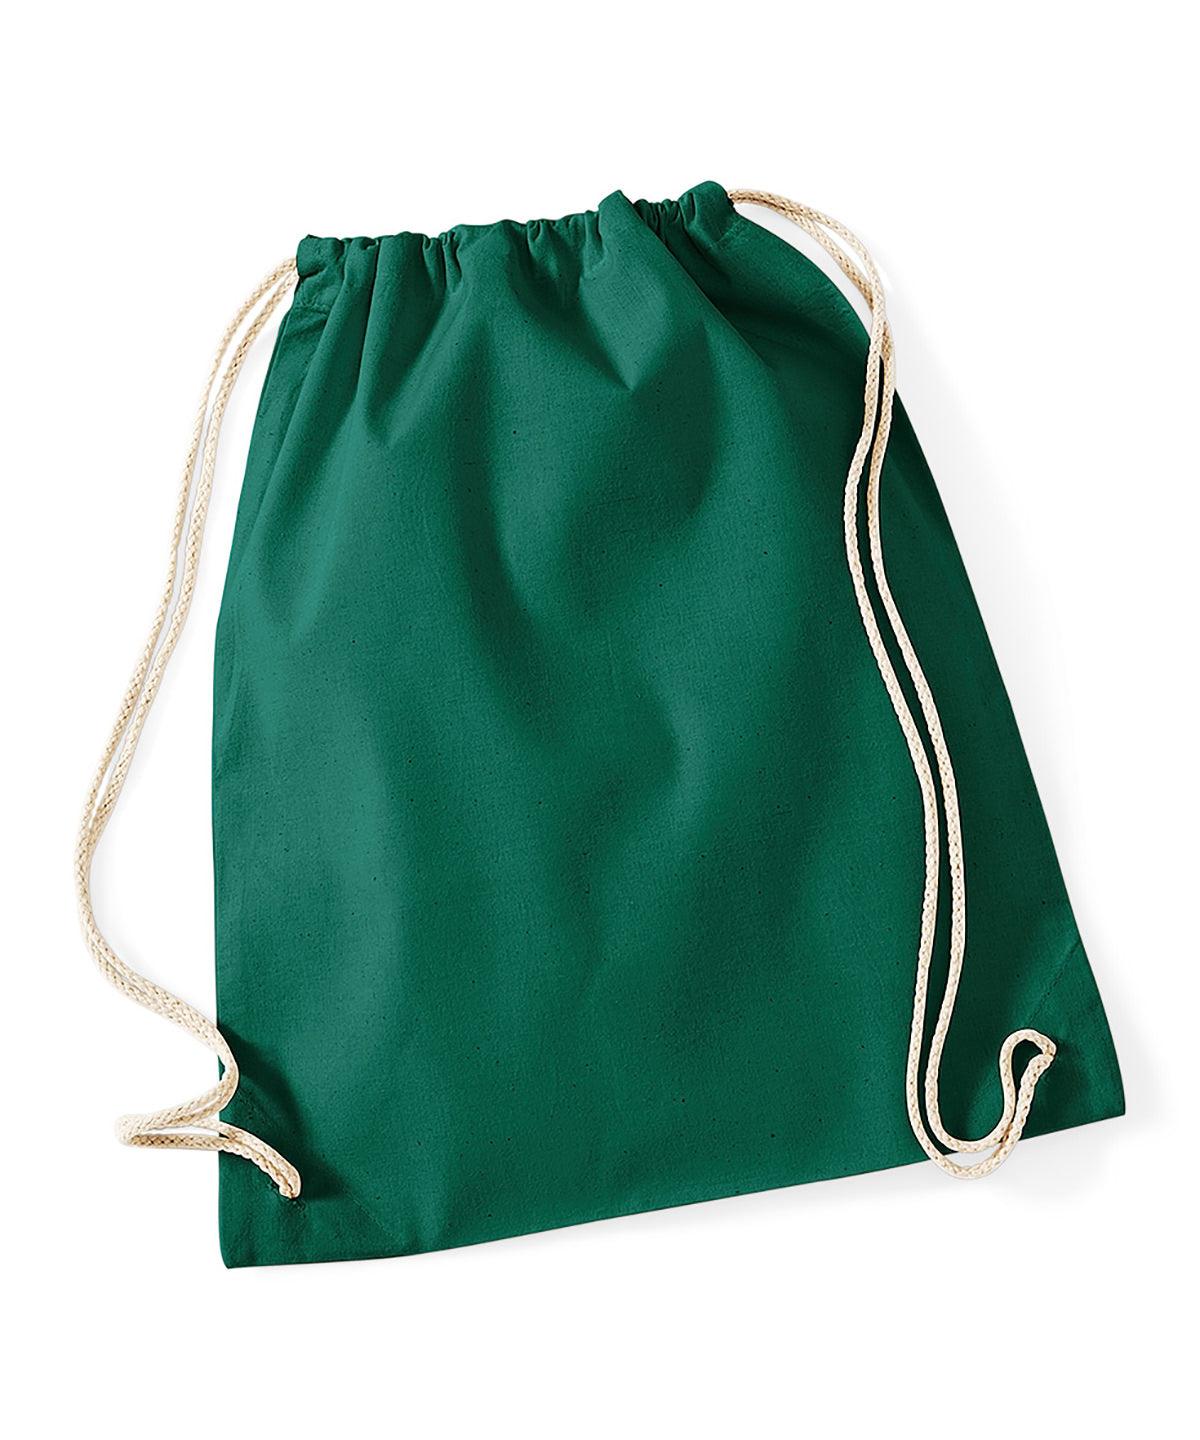 Bottle Green - Cotton gymsac Bags Westford Mill Bags & Luggage, Junior, Must Haves, Pastels and Tie Dye Schoolwear Centres